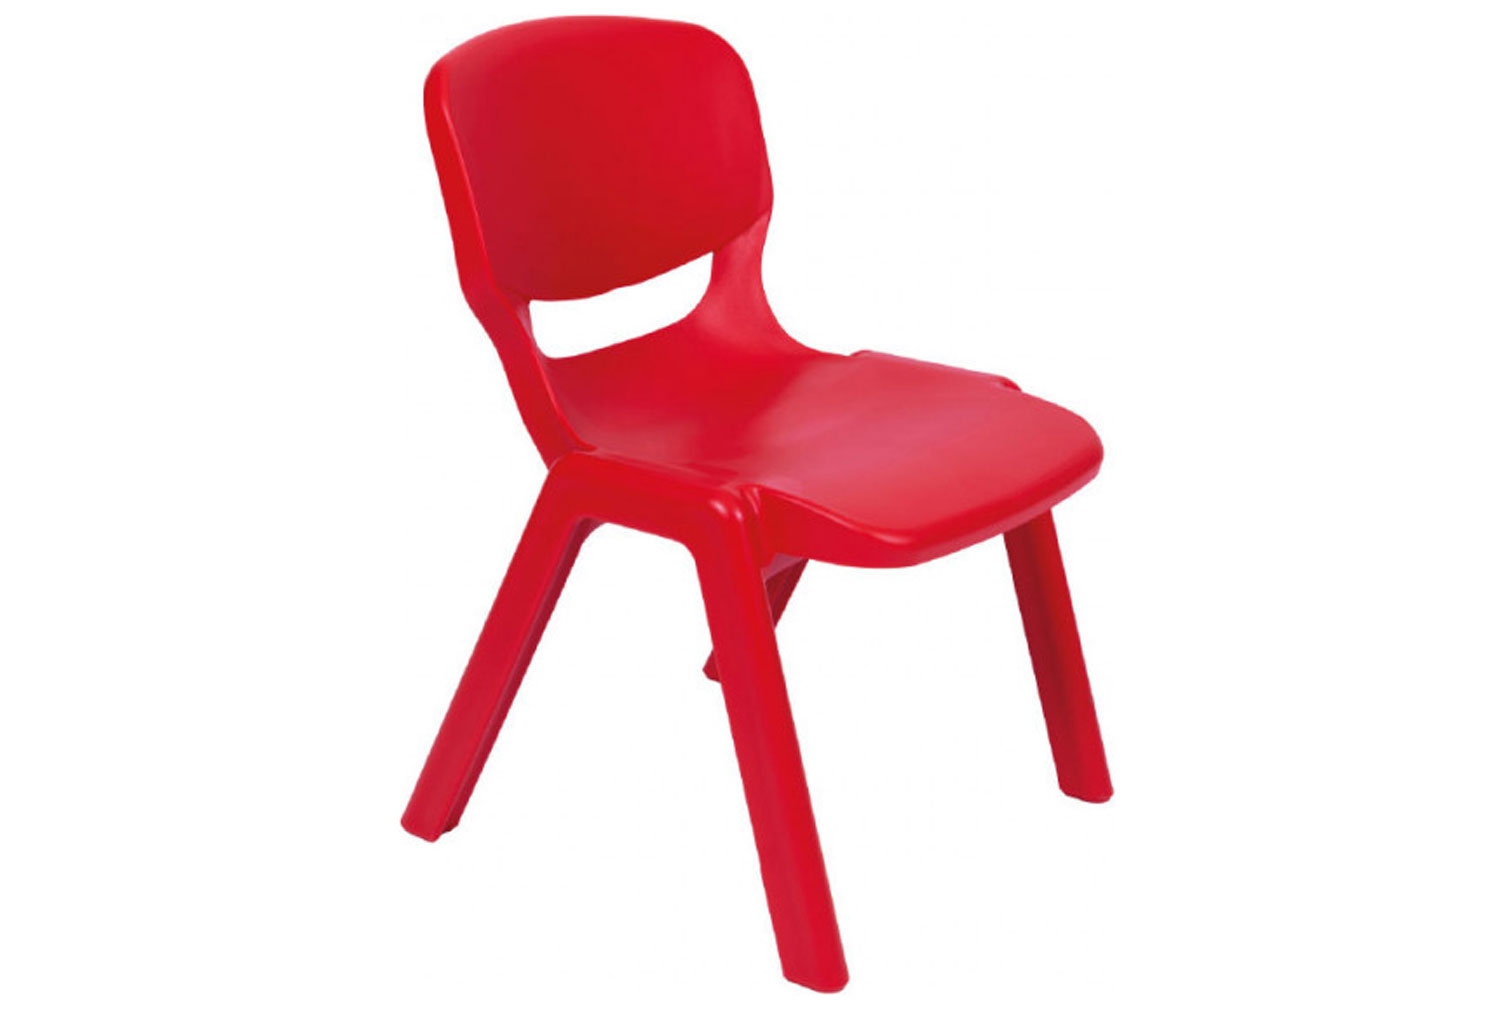 Qty 6 - Ergos Classroom Chairs, 4-6 Years - 30wx36dx31h (cm), Tomato Red